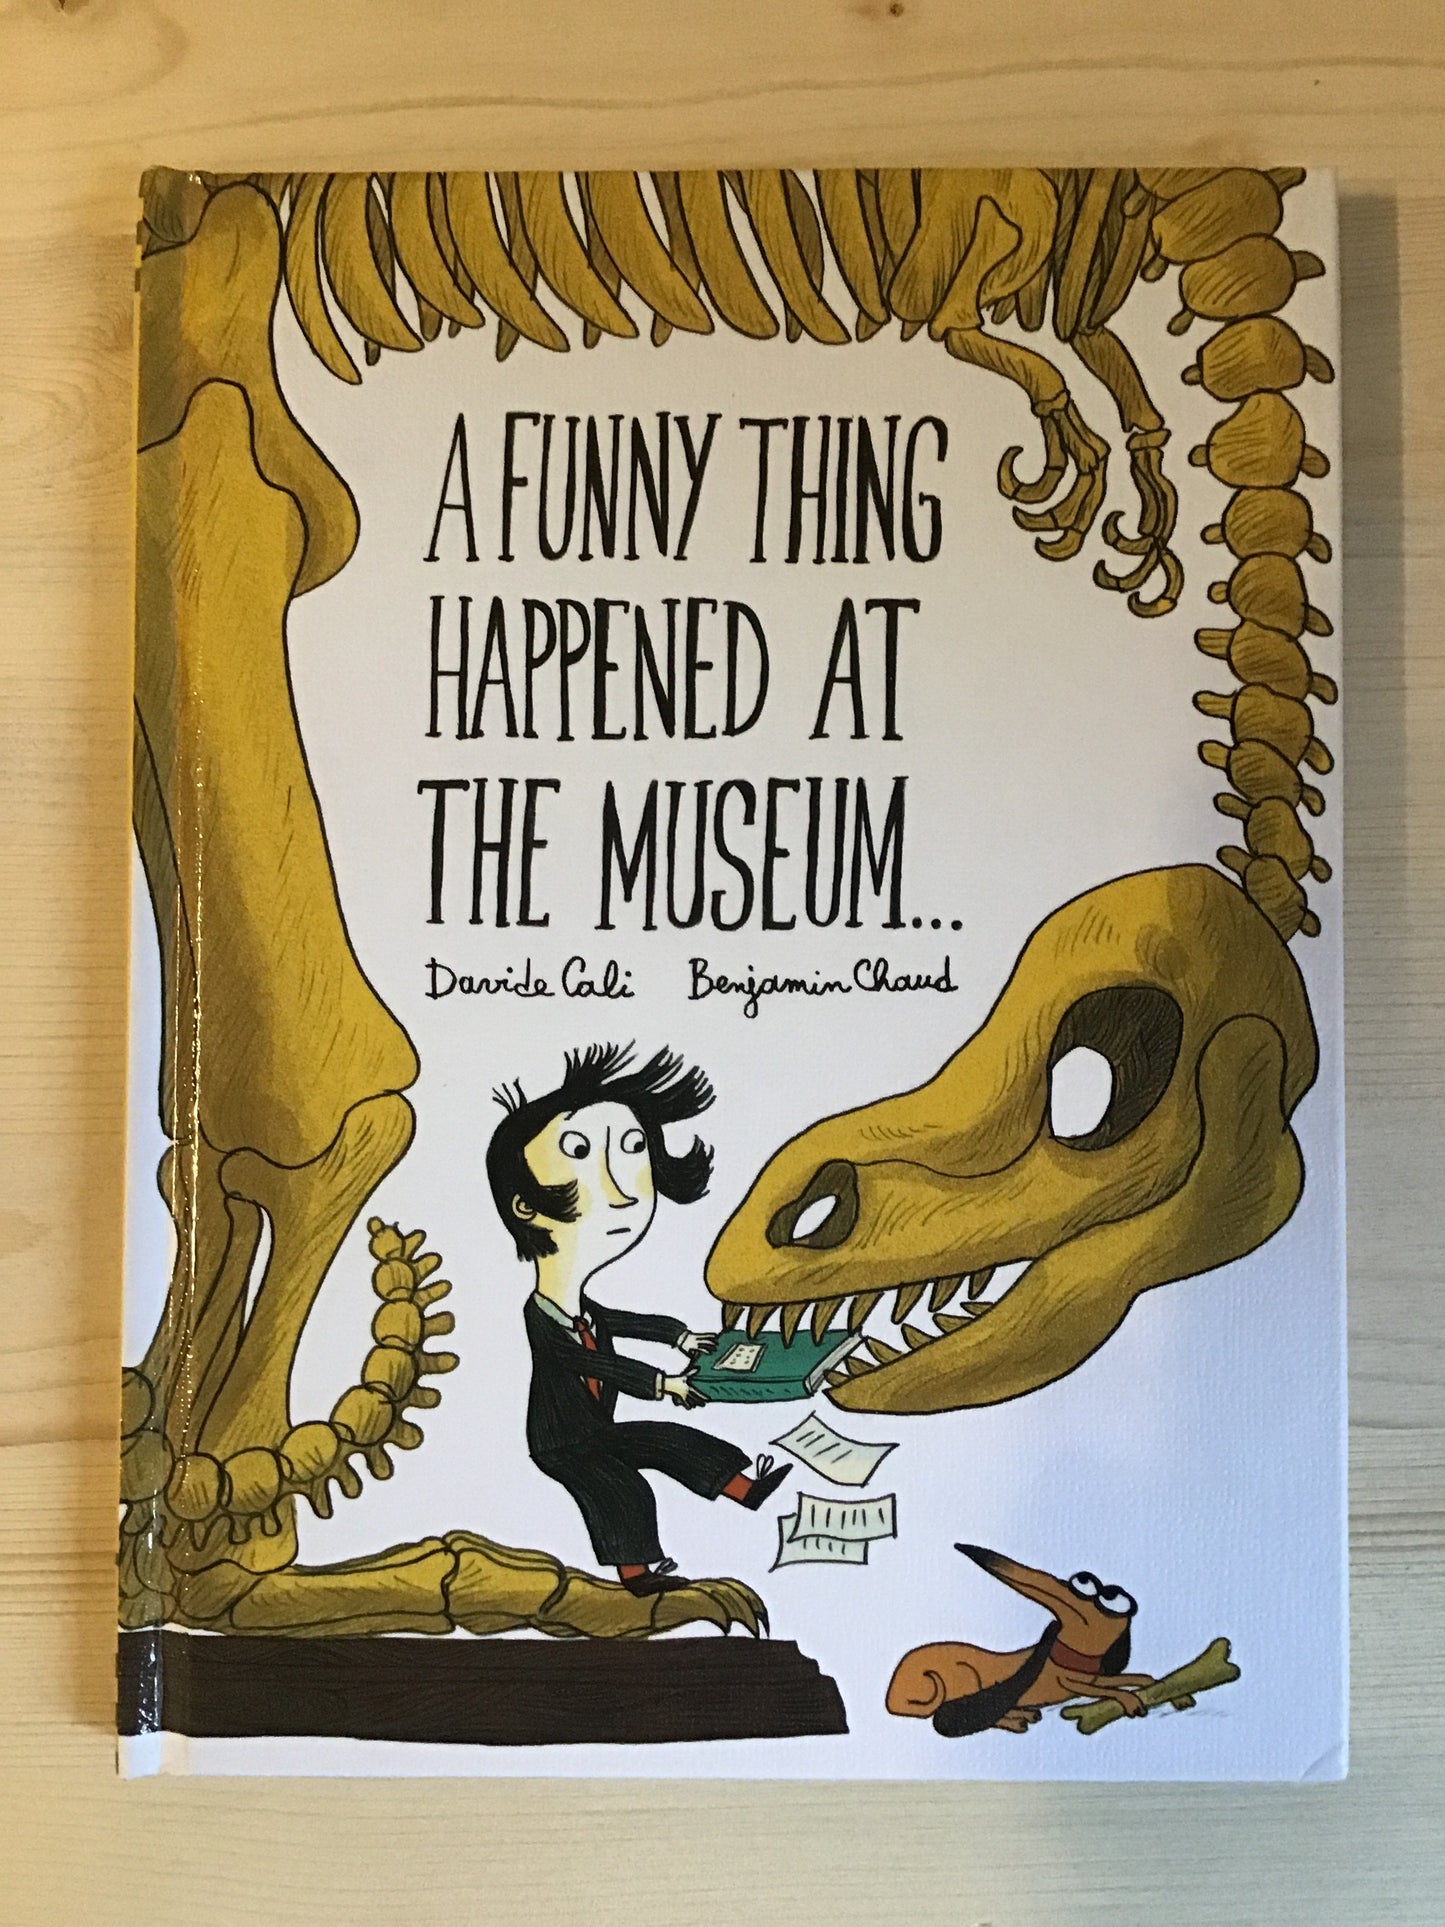 A Funny Thing Happened at the Museum...